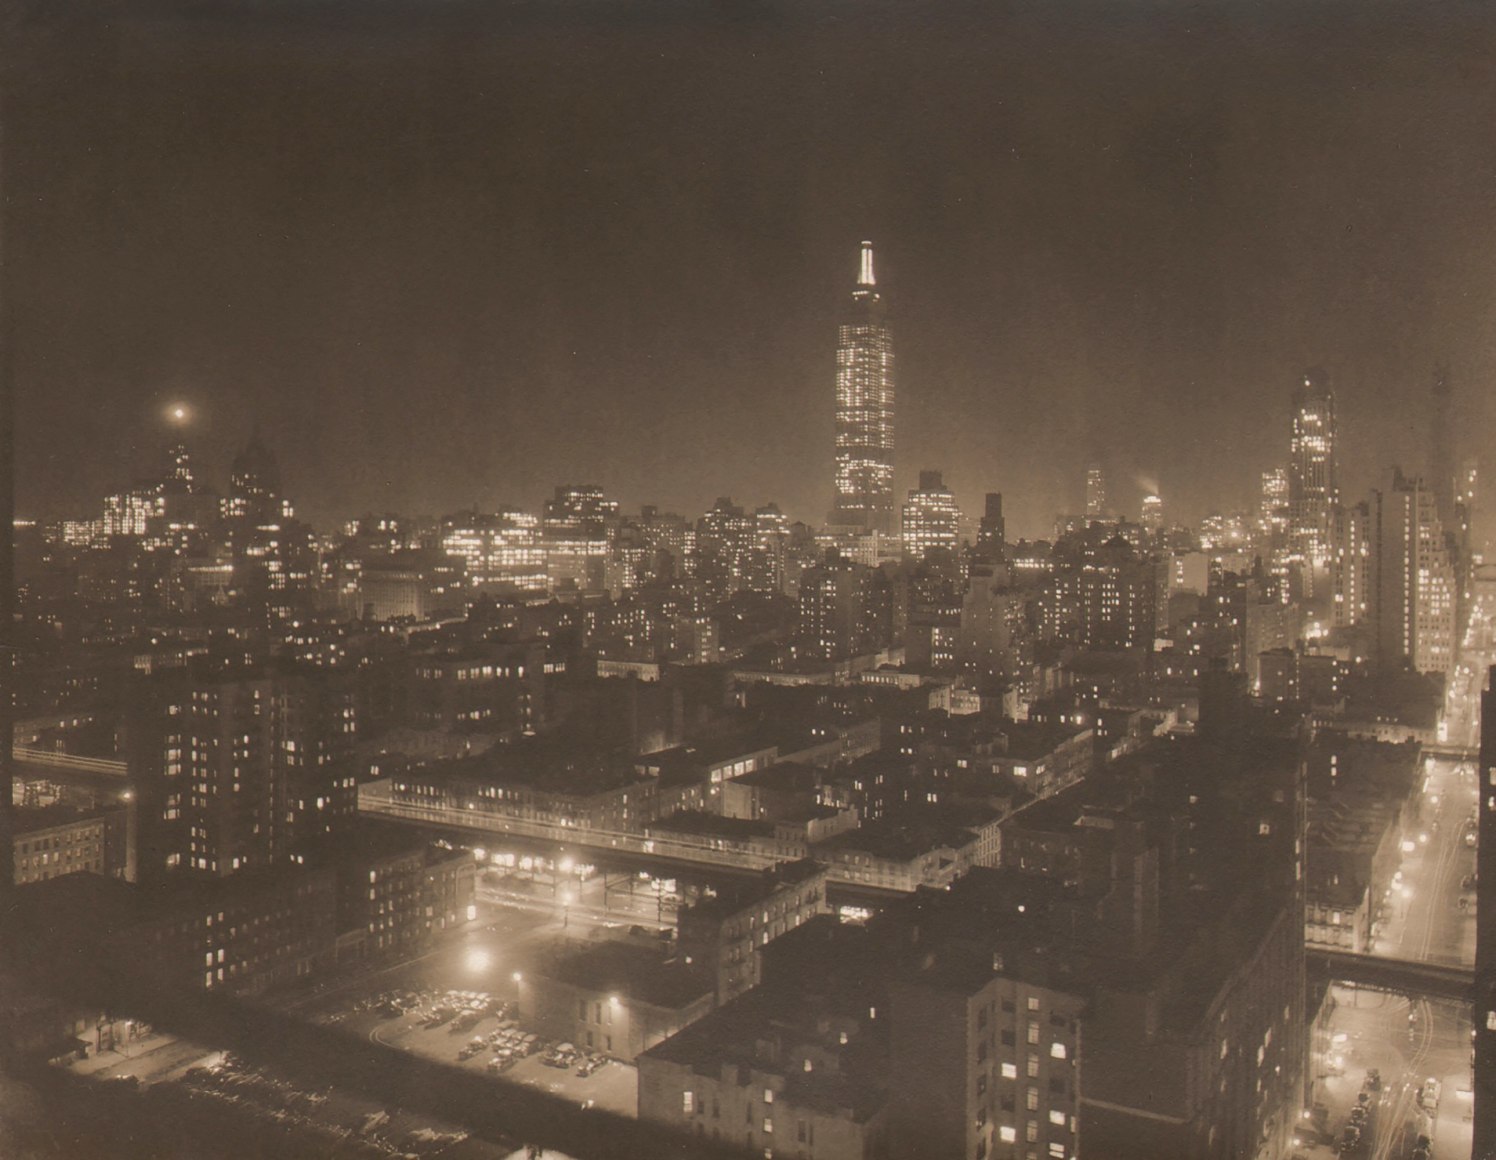 Paul J. Woolf, Empire State Building, c. 1933. Night time cityscape with Empire State Building in center of frame in background.